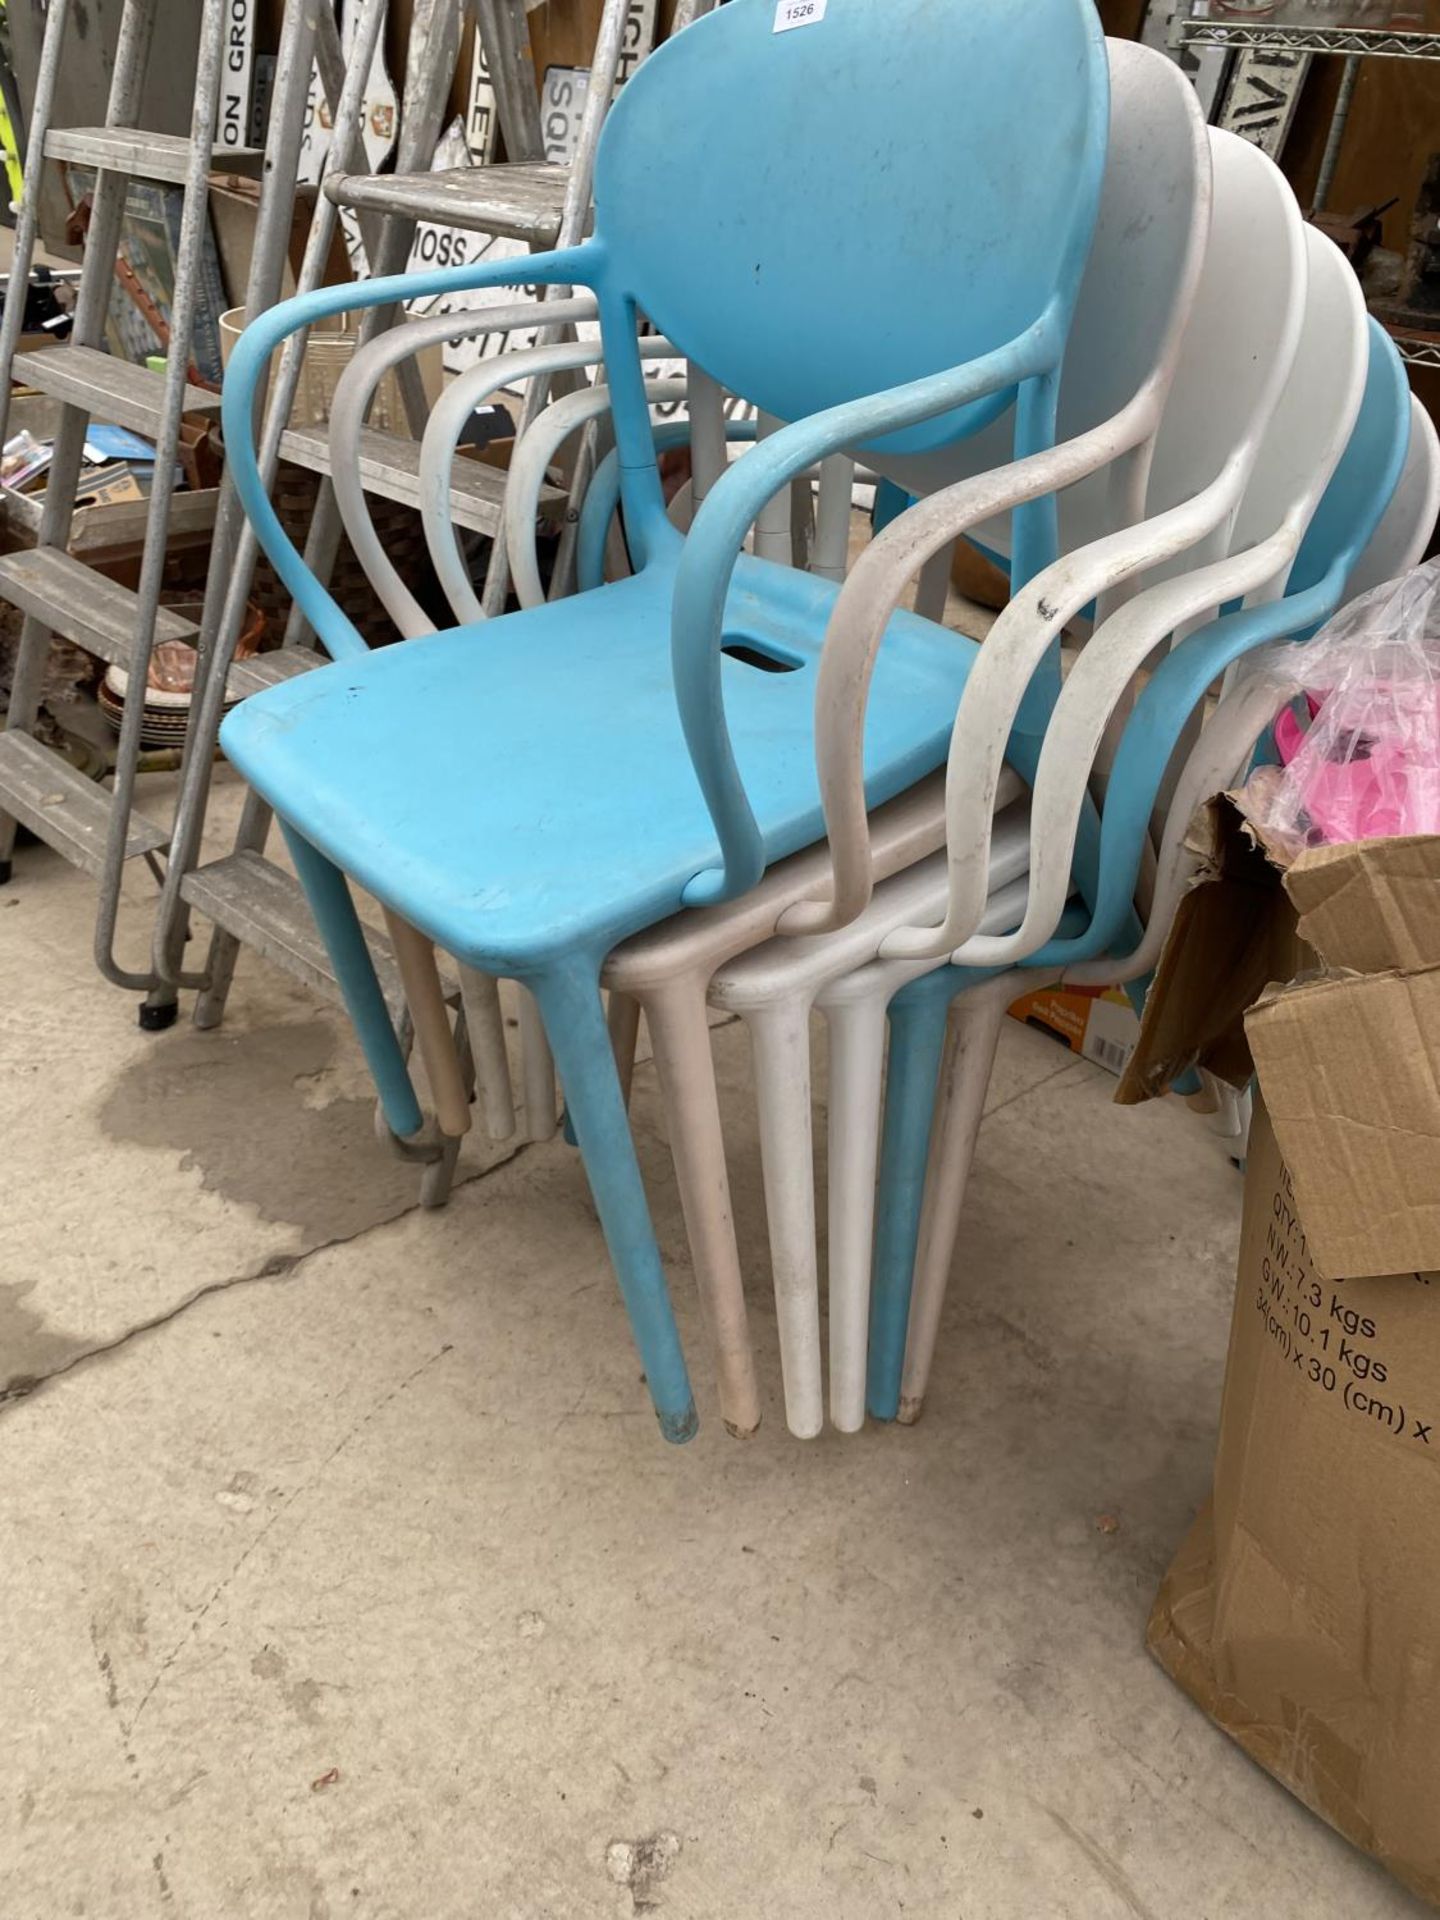 SIX HARD PLASTIC STACKING CHAIRS - Image 2 of 2